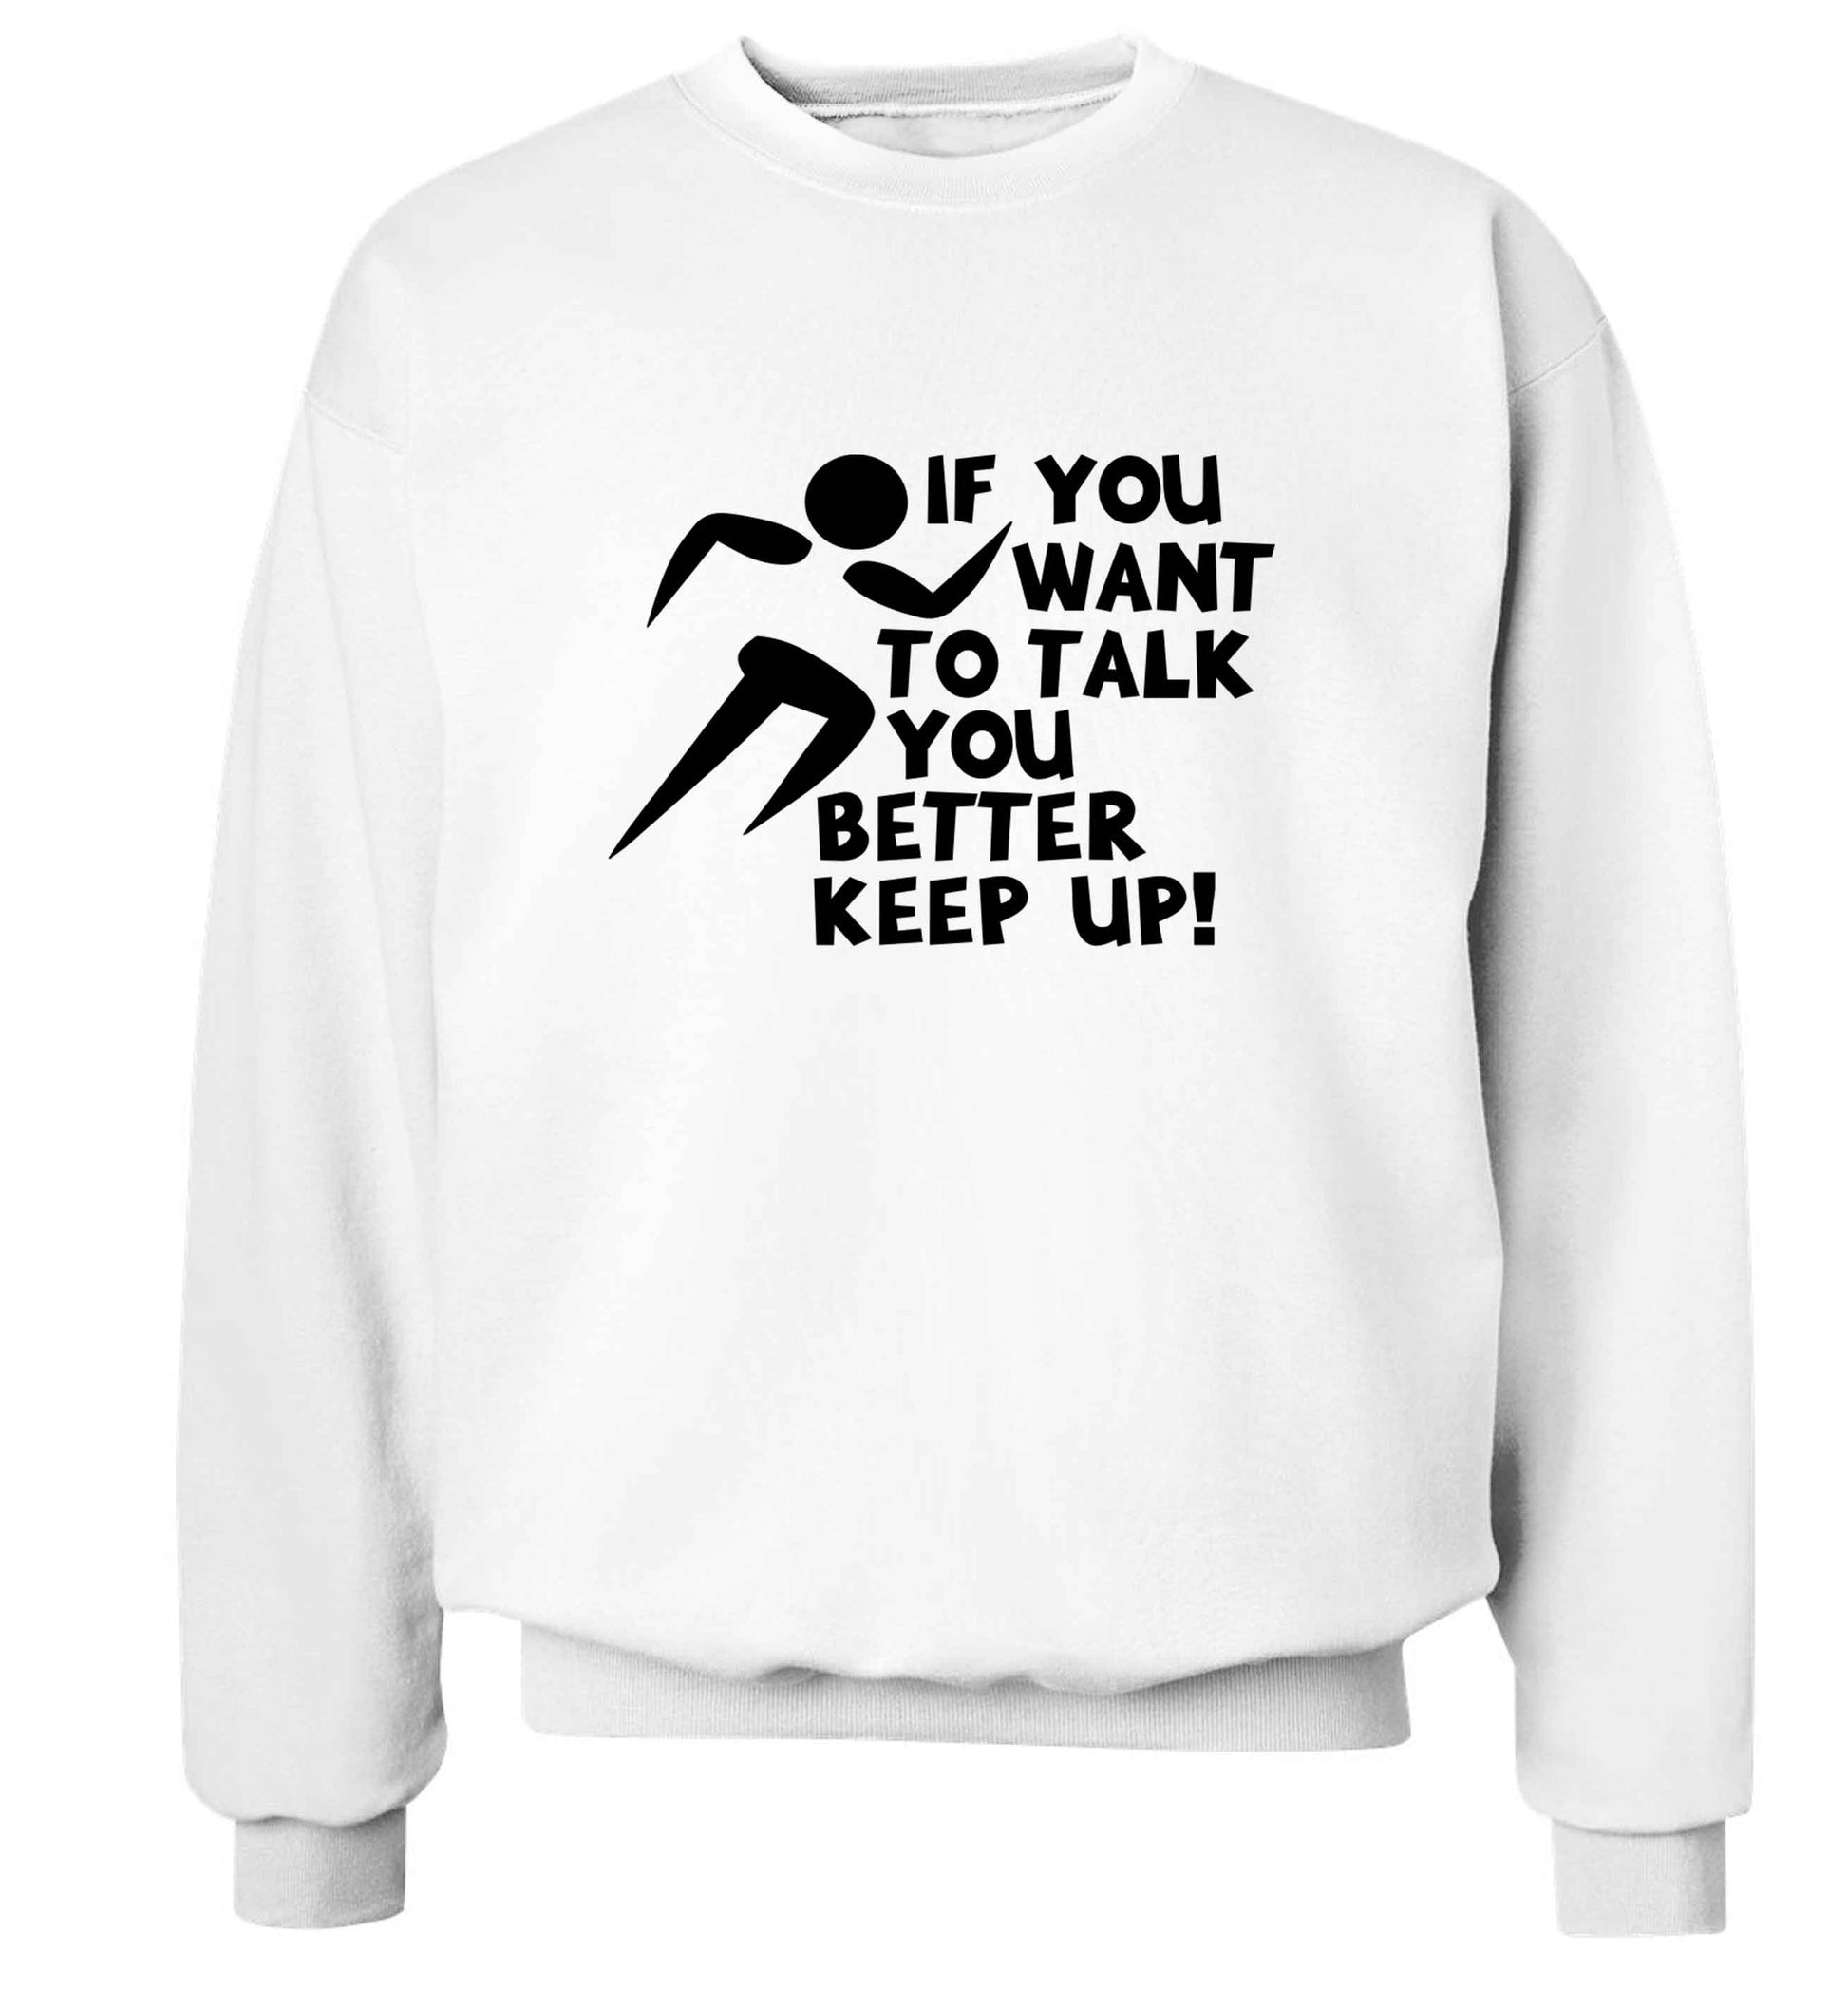 If you want to talk you better keep up! adult's unisex white sweater 2XL